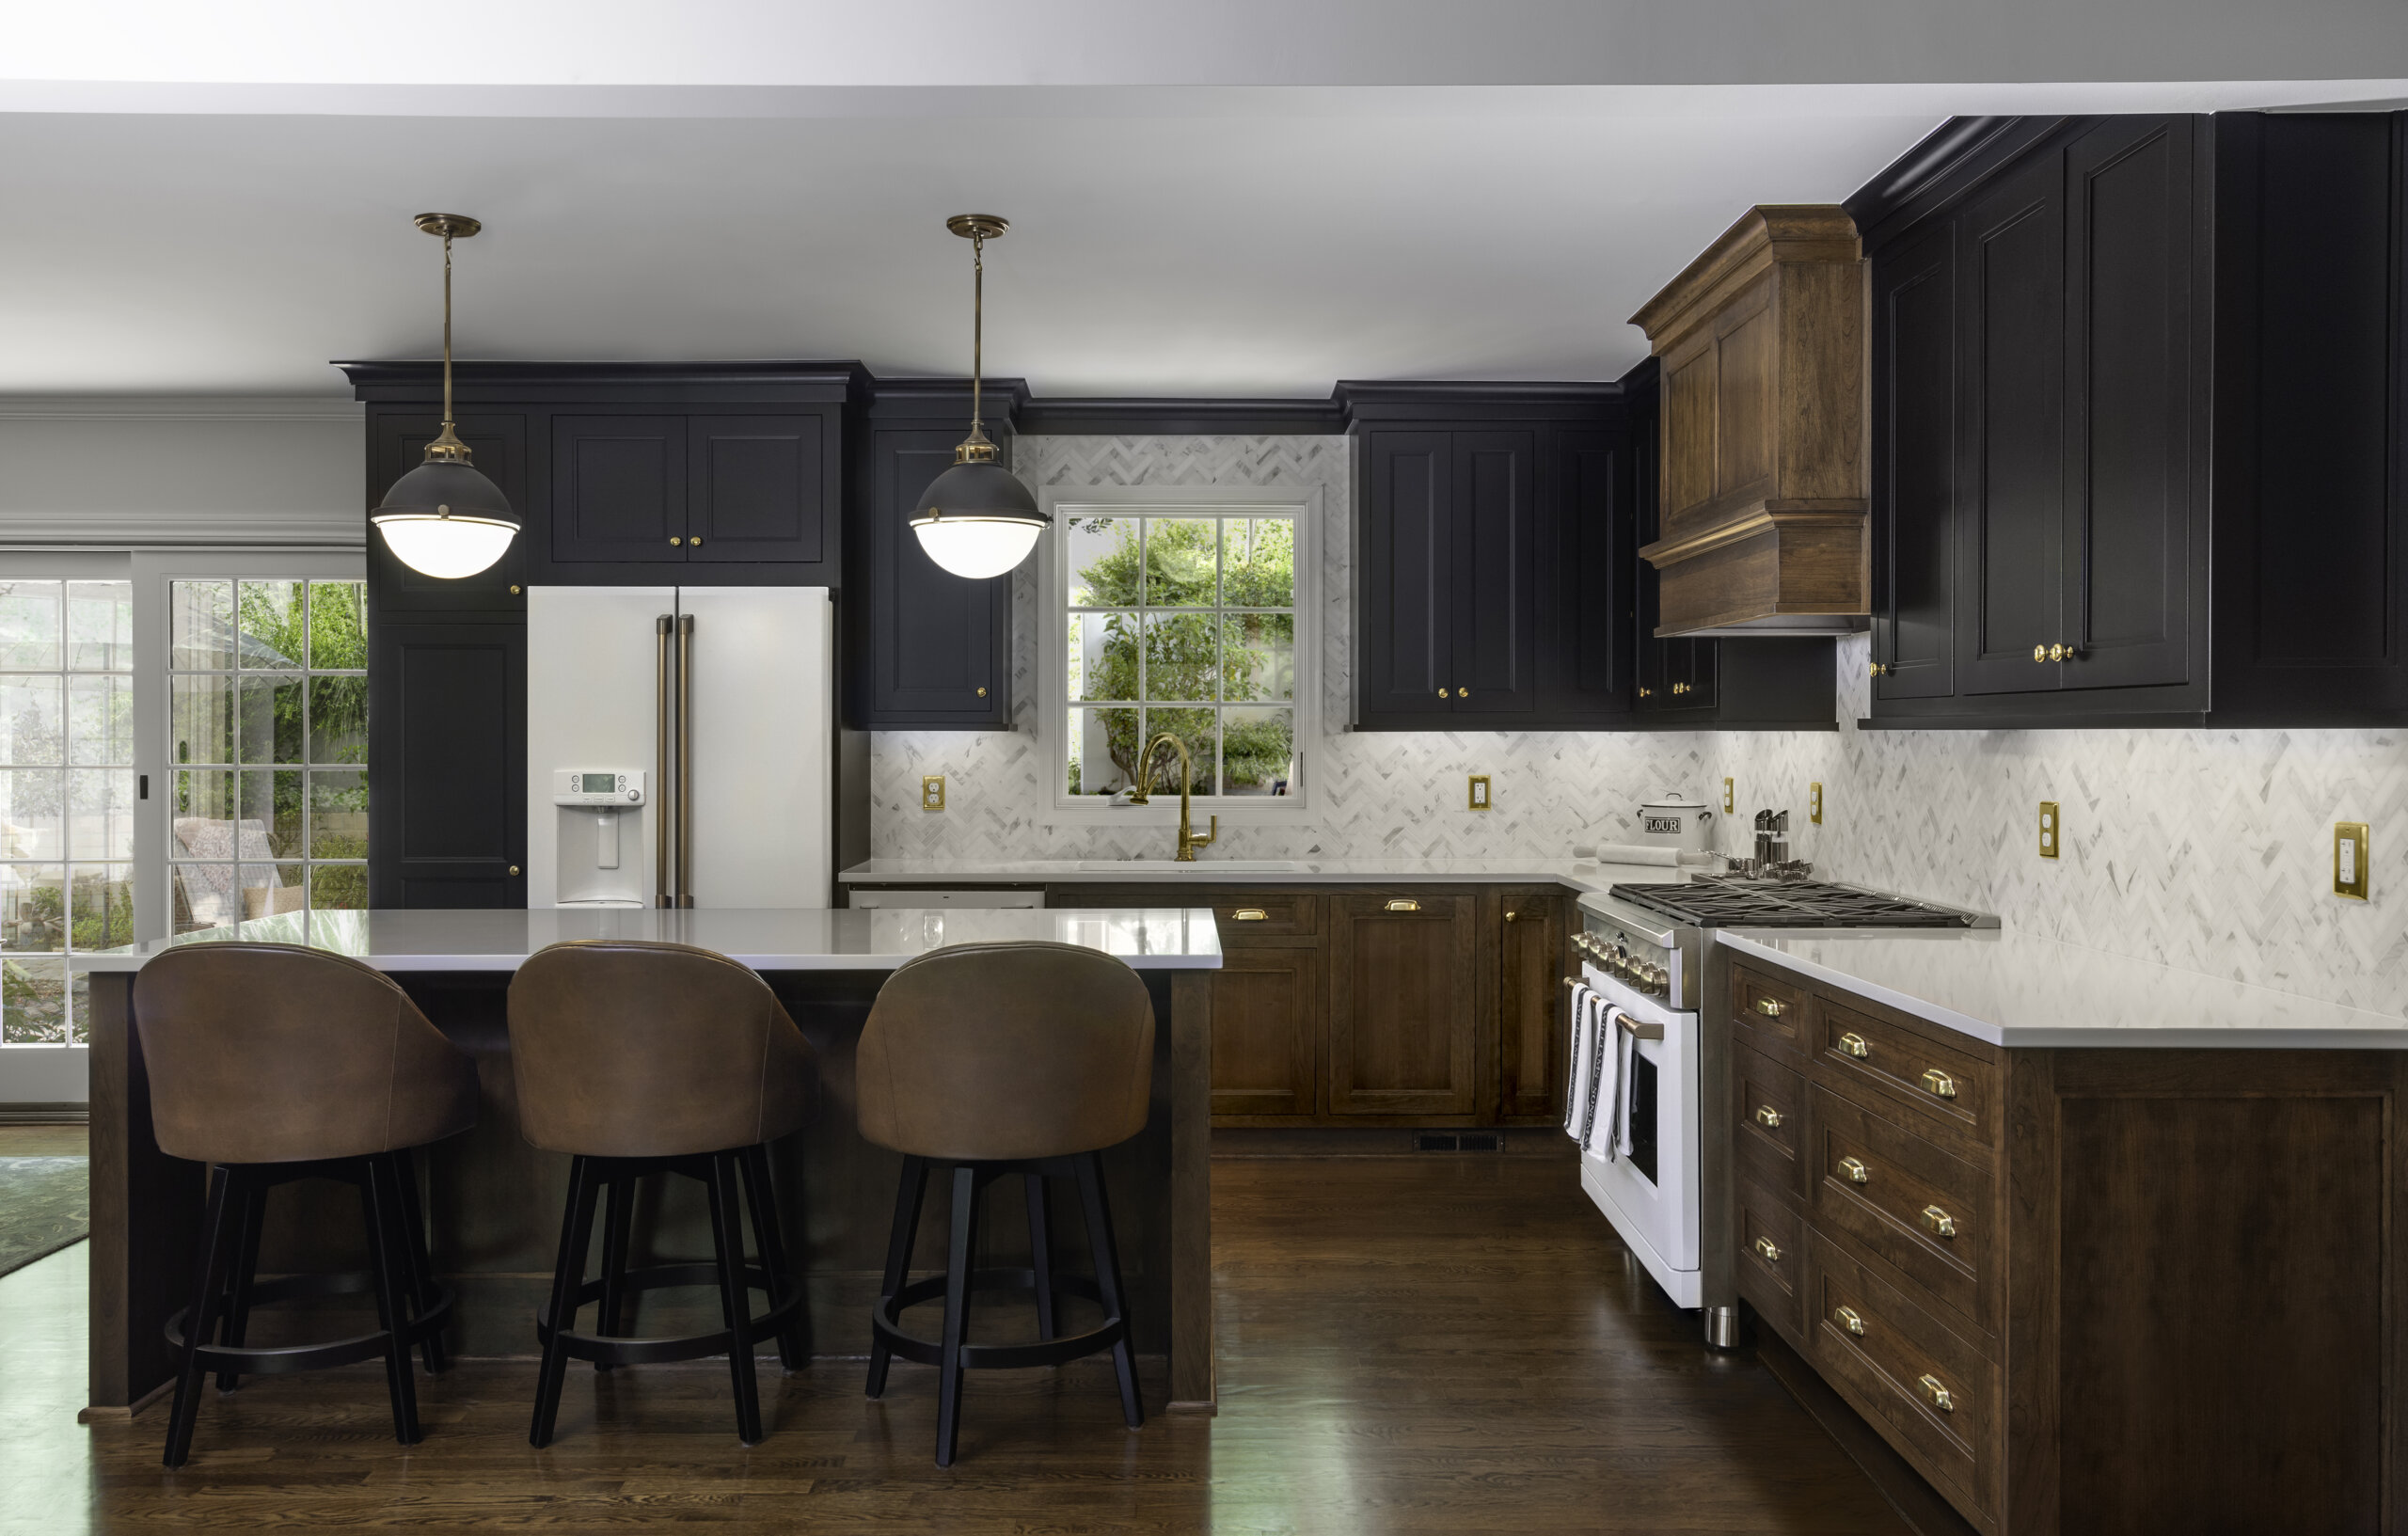 Check out these kitchen cabinet reviews with testimonies from homeowners on their remodel project with Dura Supreme Cabinetry. Hear the client’s cabinetry testimony about this beautiful black paint and cherry wood kitchen remodel project.